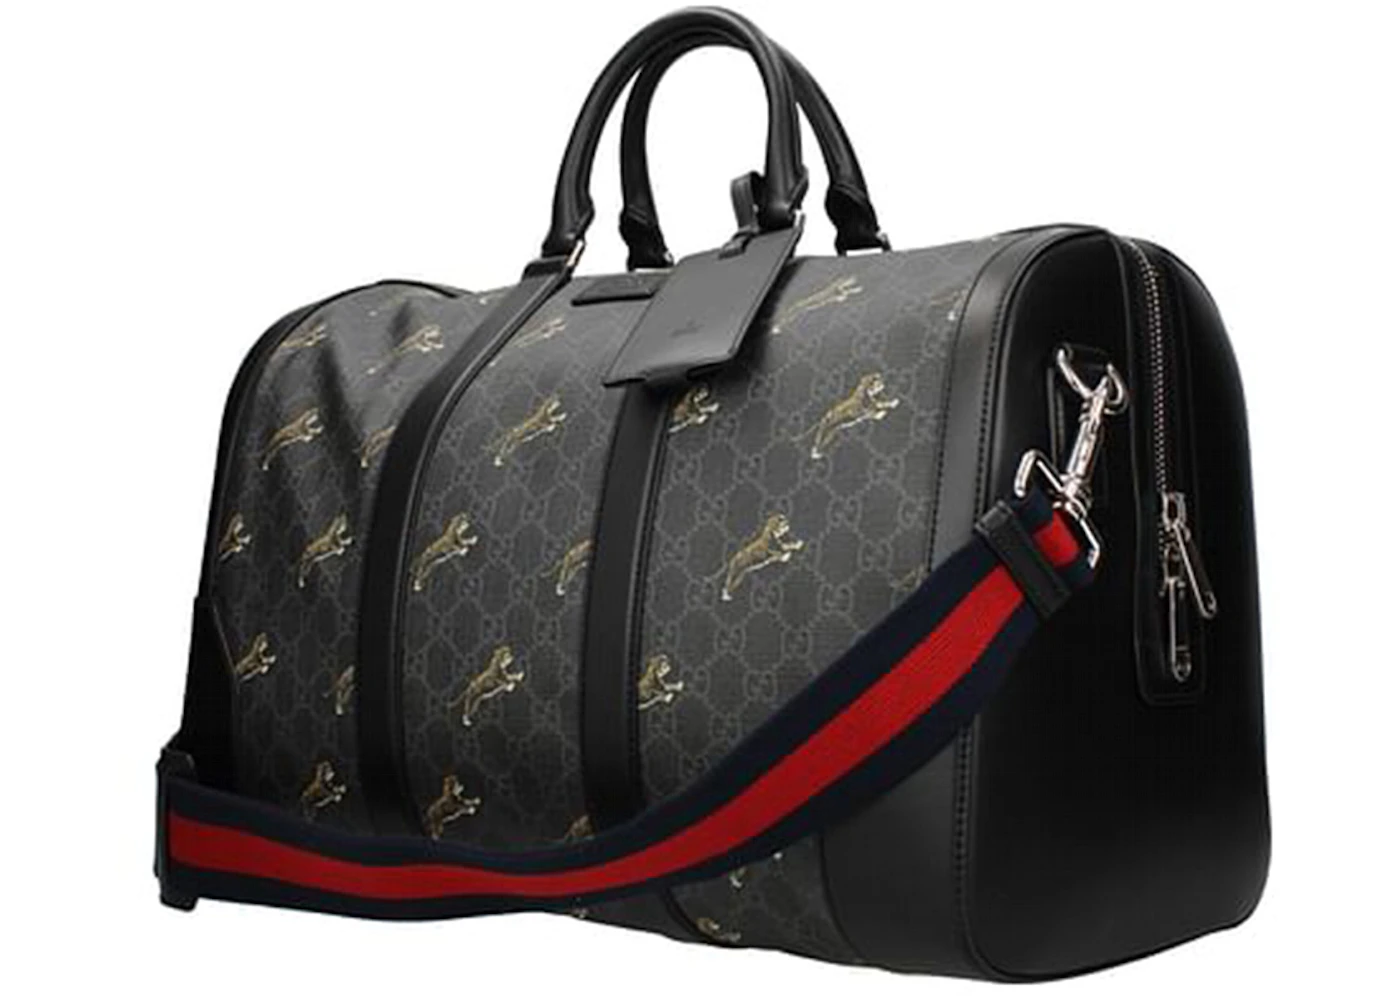 Gucci GG Supreme Tigers Duffle Bag Black/Grey in Leather with Silver ...